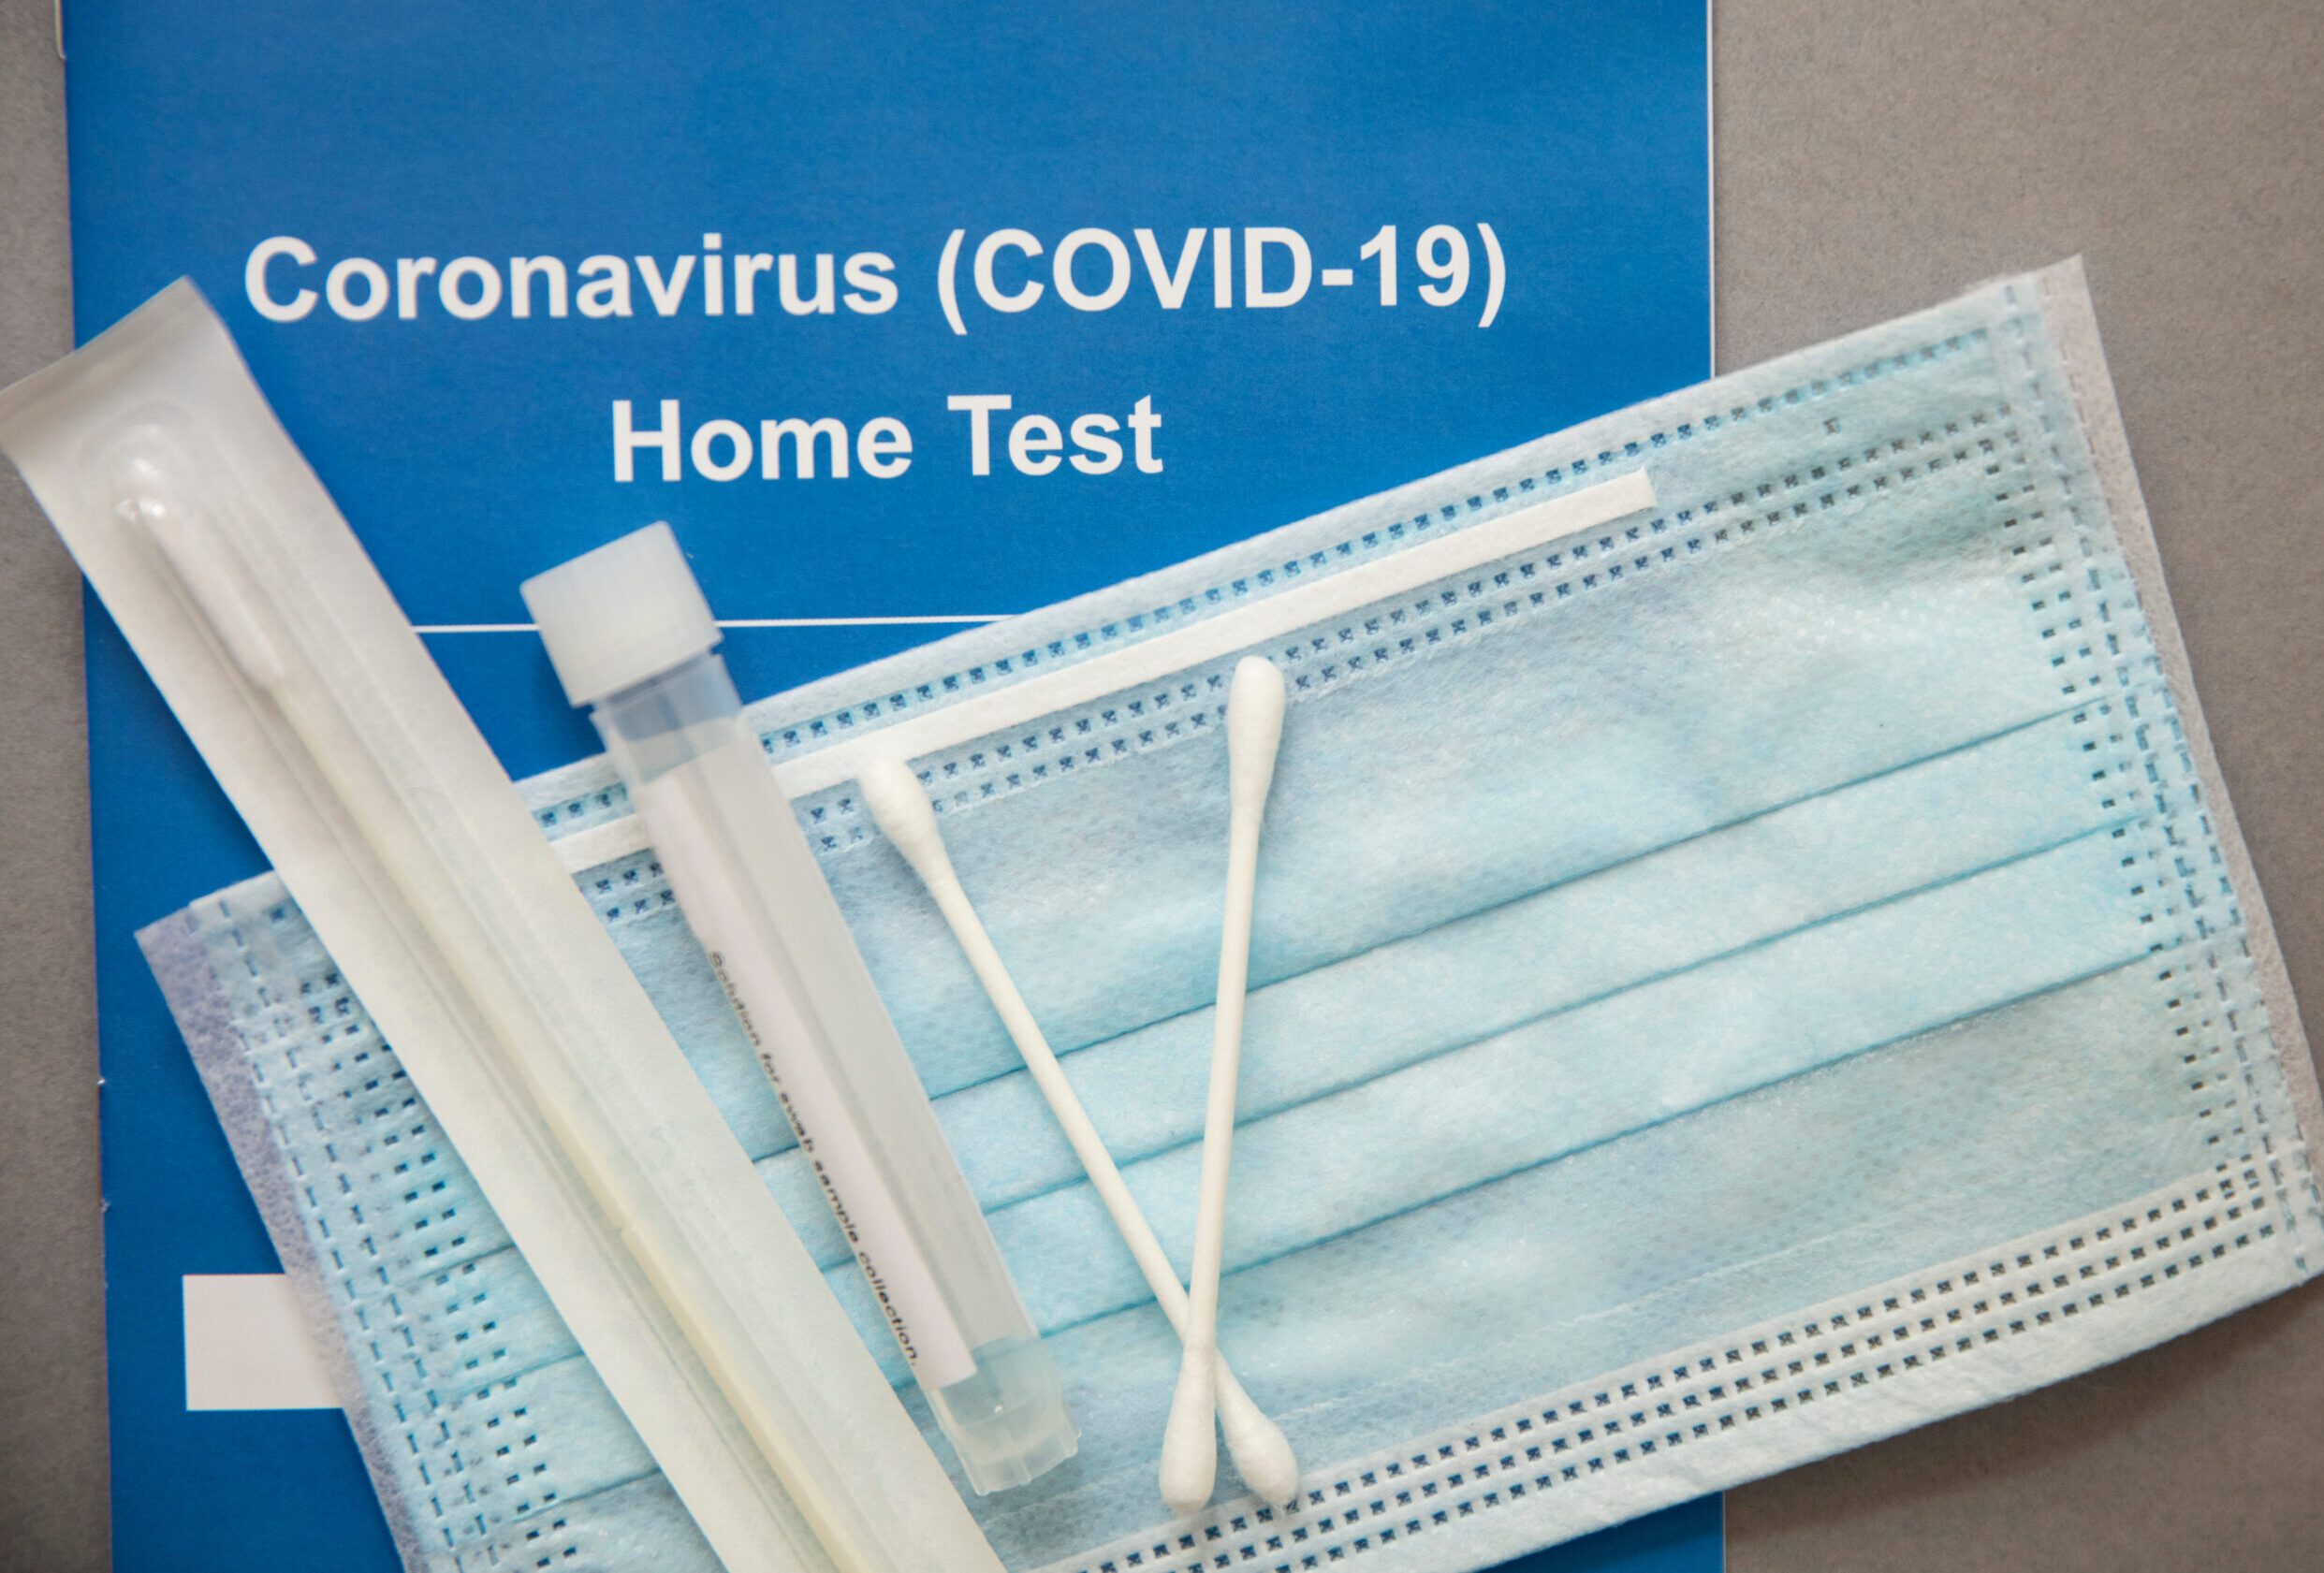 A possible false positive result from Ellume’s COVID-19 home test is being reported